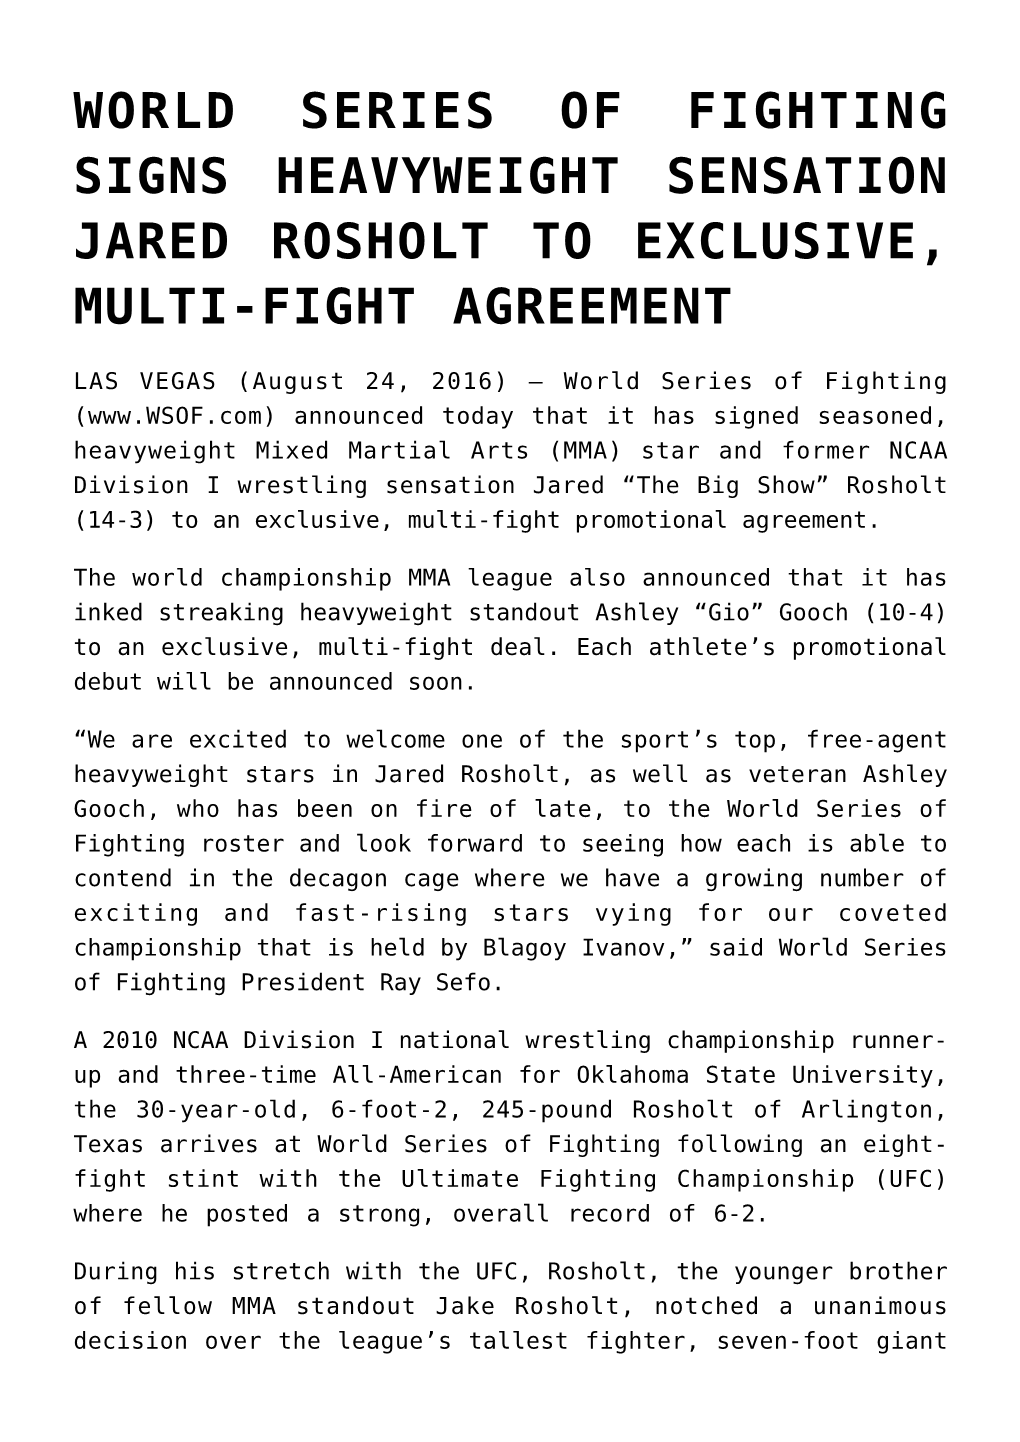 World Series of Fighting Signs Heavyweight Sensation Jared Rosholt to Exclusive, Multi-Fight Agreement